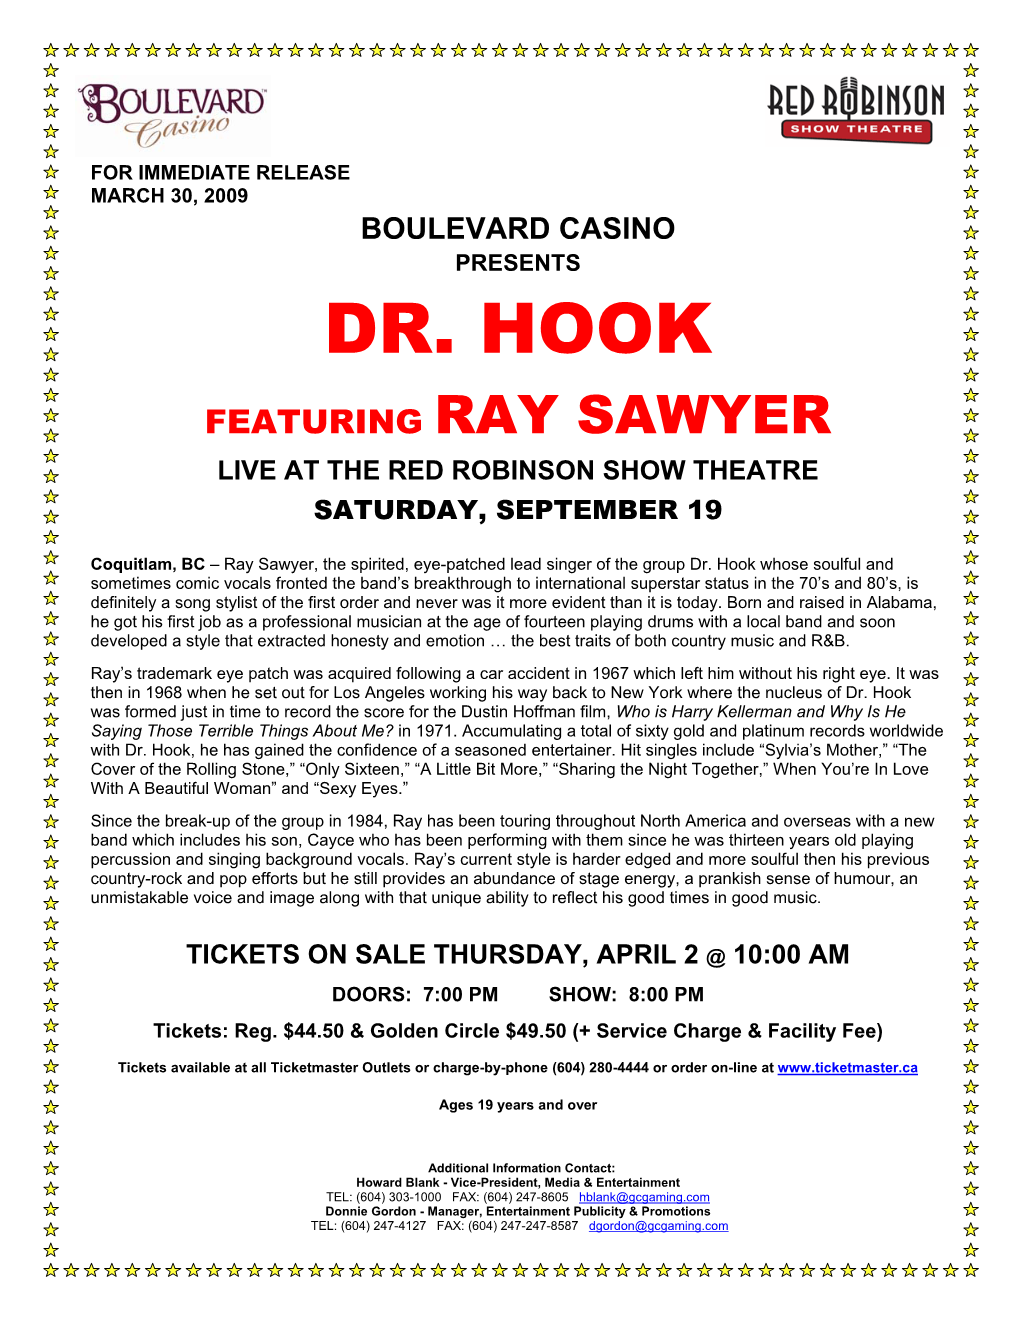 Dr. Hook Featuring Ray Sawyer